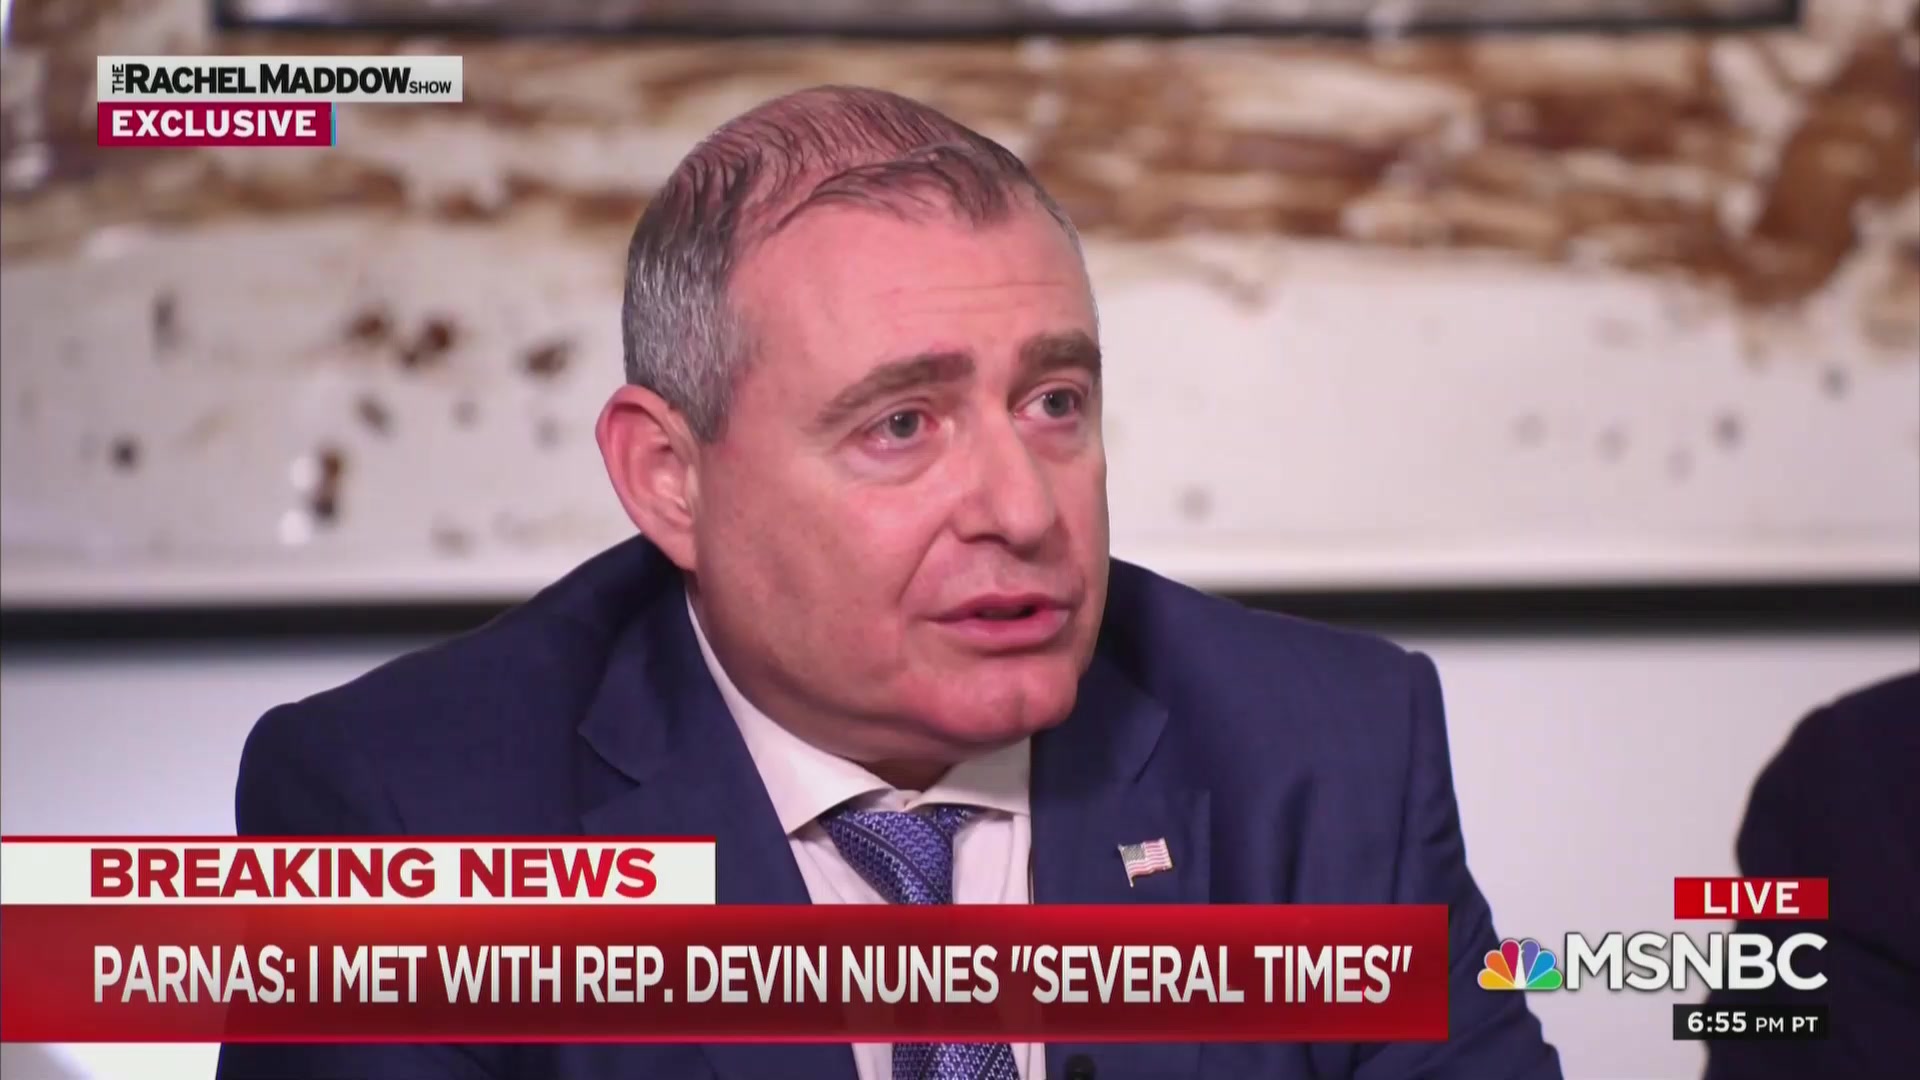 Lev Parnas Implicates Nunes in Maddow Interview: ‘He Knows Who I Am,’ We Met ‘Several Times’